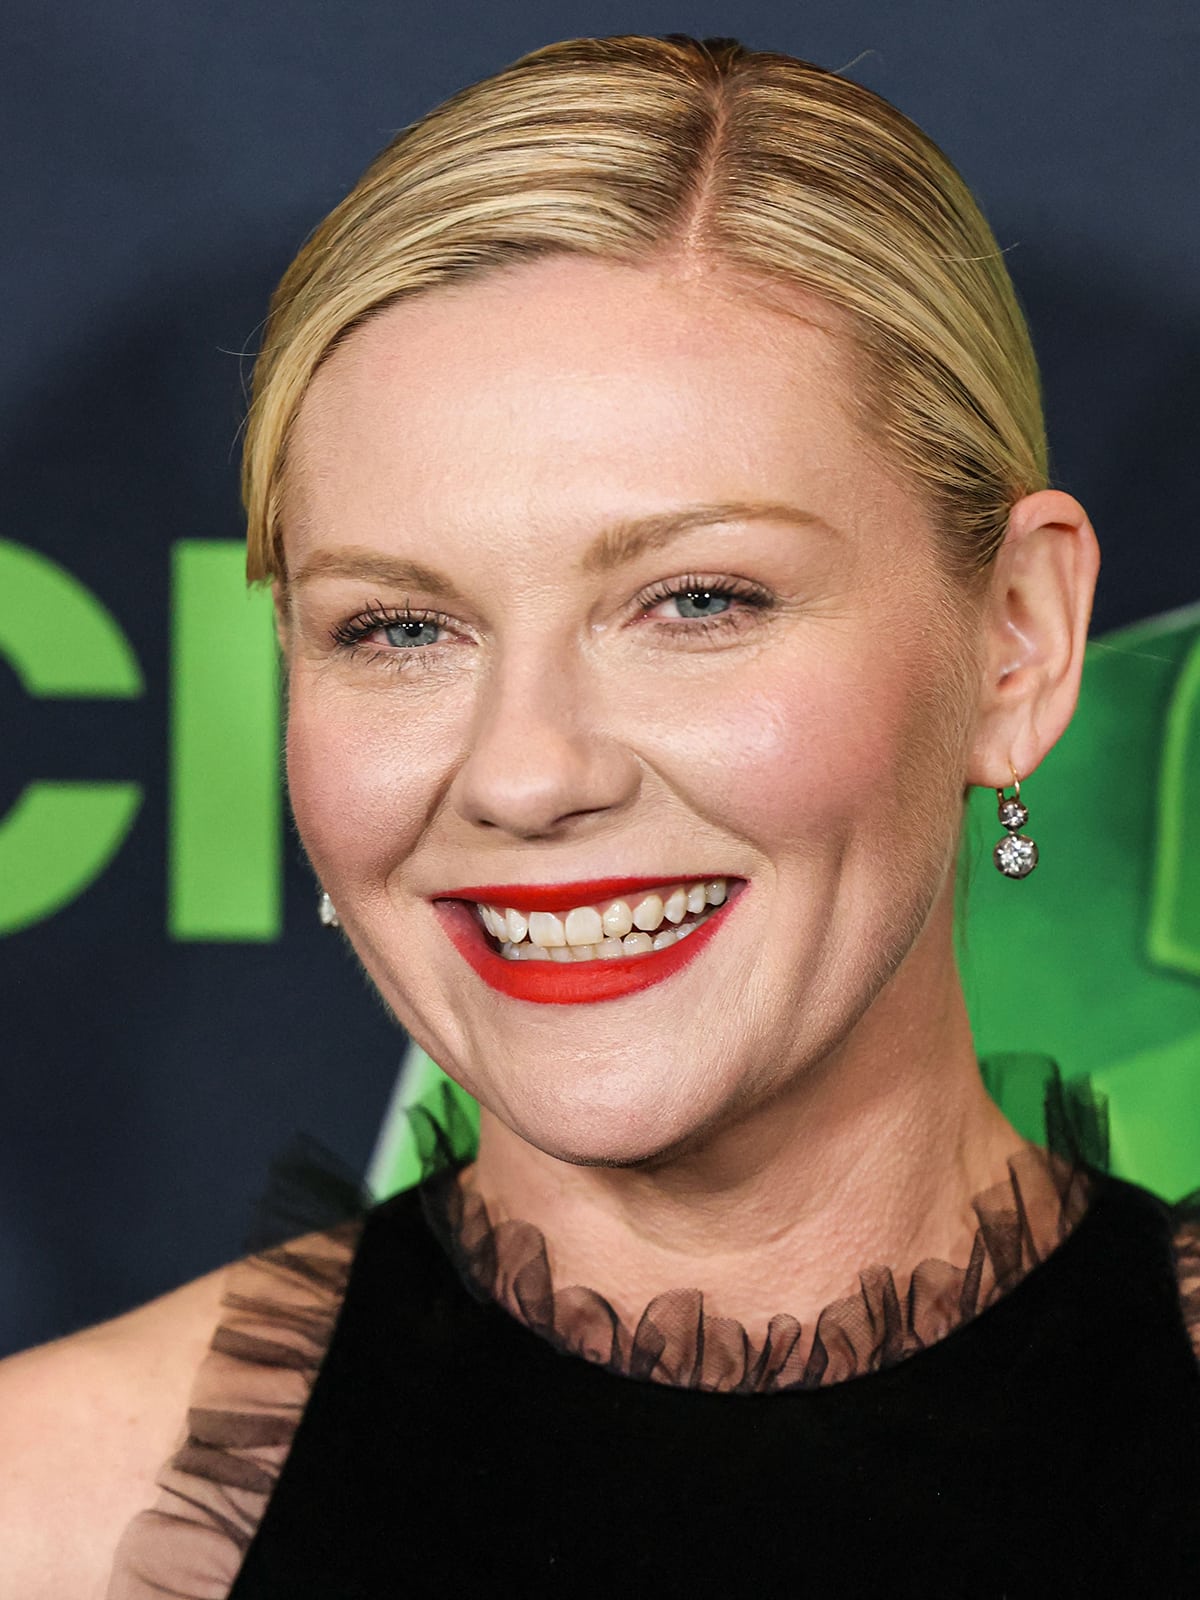 Accessorizing with Neil Lane diamond earrings, Kirsten Dunst completes her red carpet look with a neat side-parted updo and a swipe of bright red lipstick